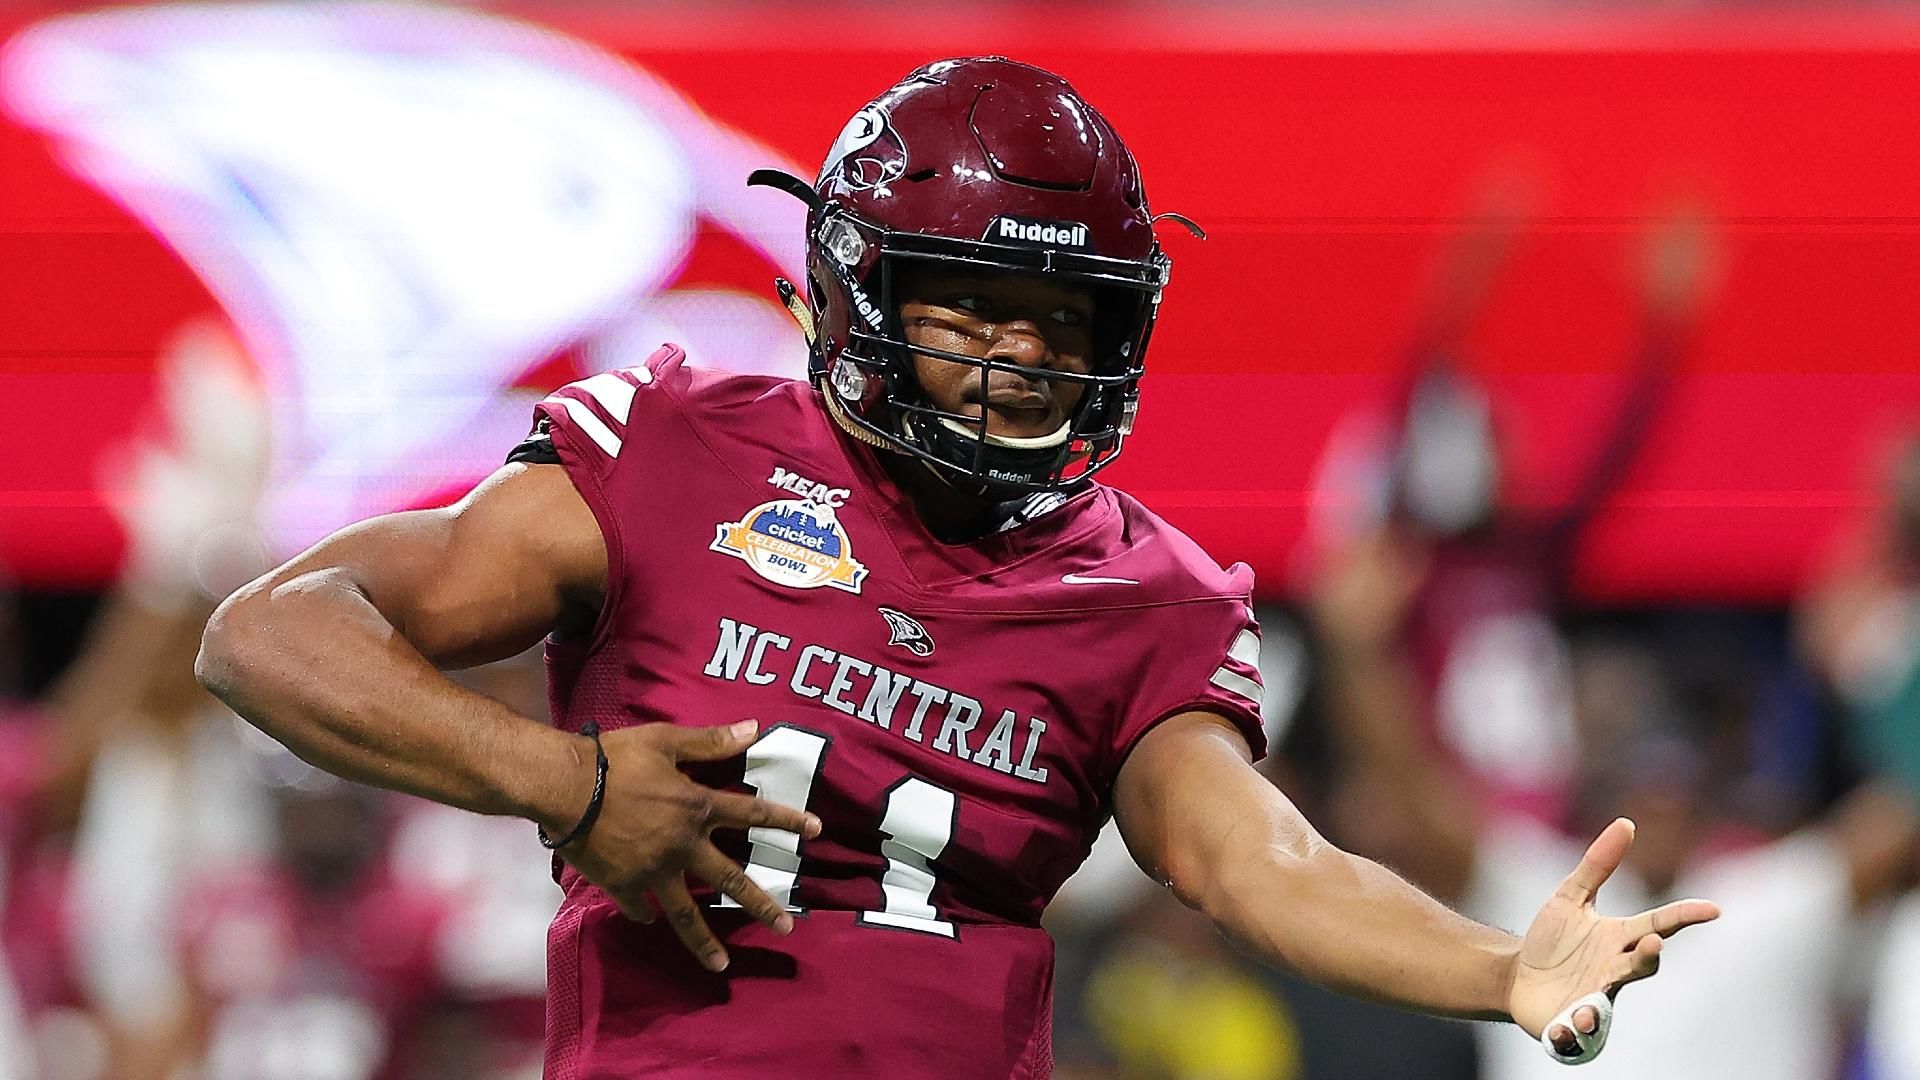 North Carolina Central Eagles vs Jackson State Tigers Prediction, Betting Tips and Odds | 18 DECEMBER 2022